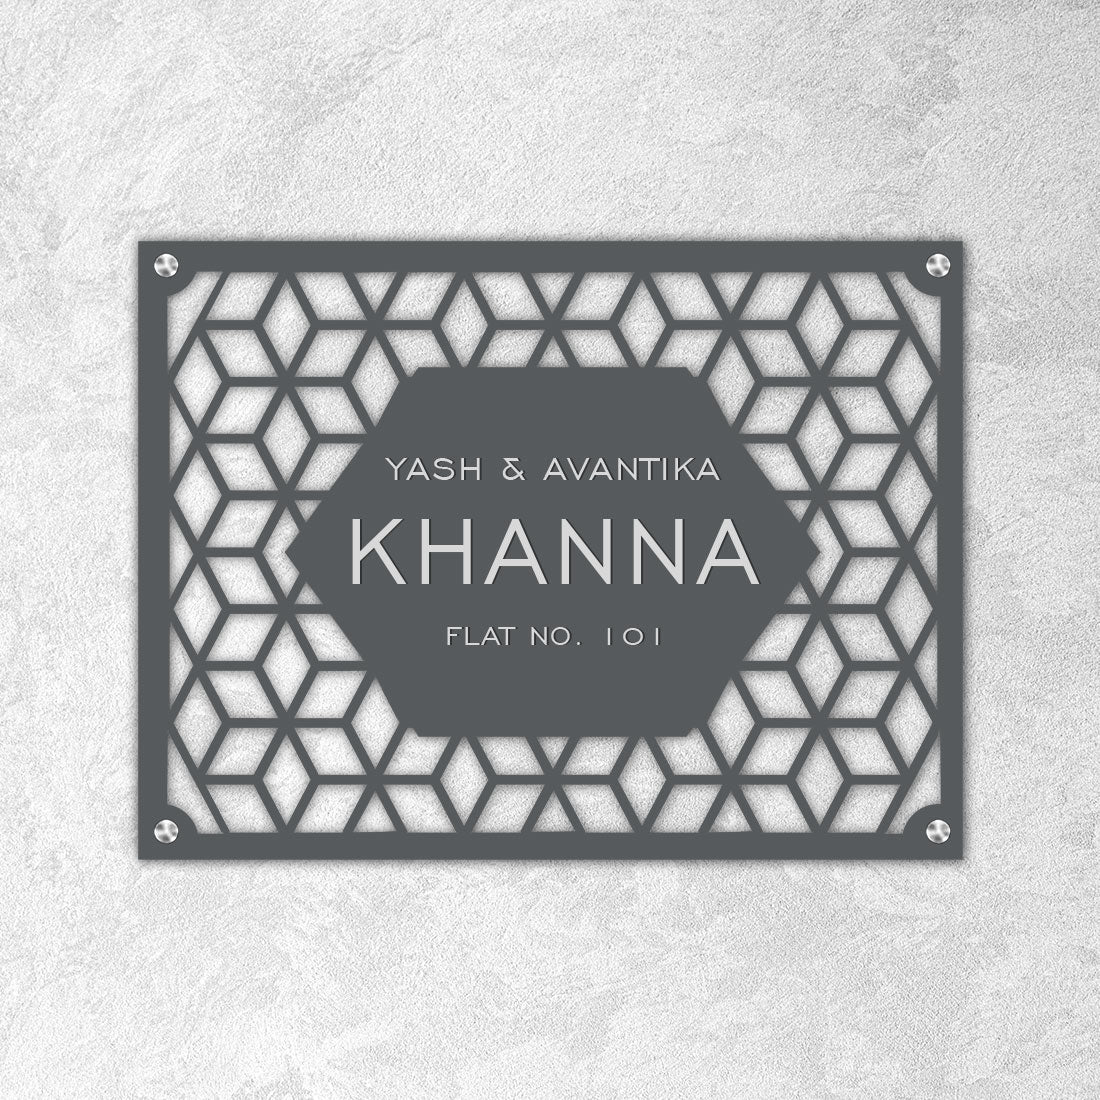 Premium Name Plate for Home Stainless Steel Nameplate Exquisitely Finished Laser Cut-Hex World